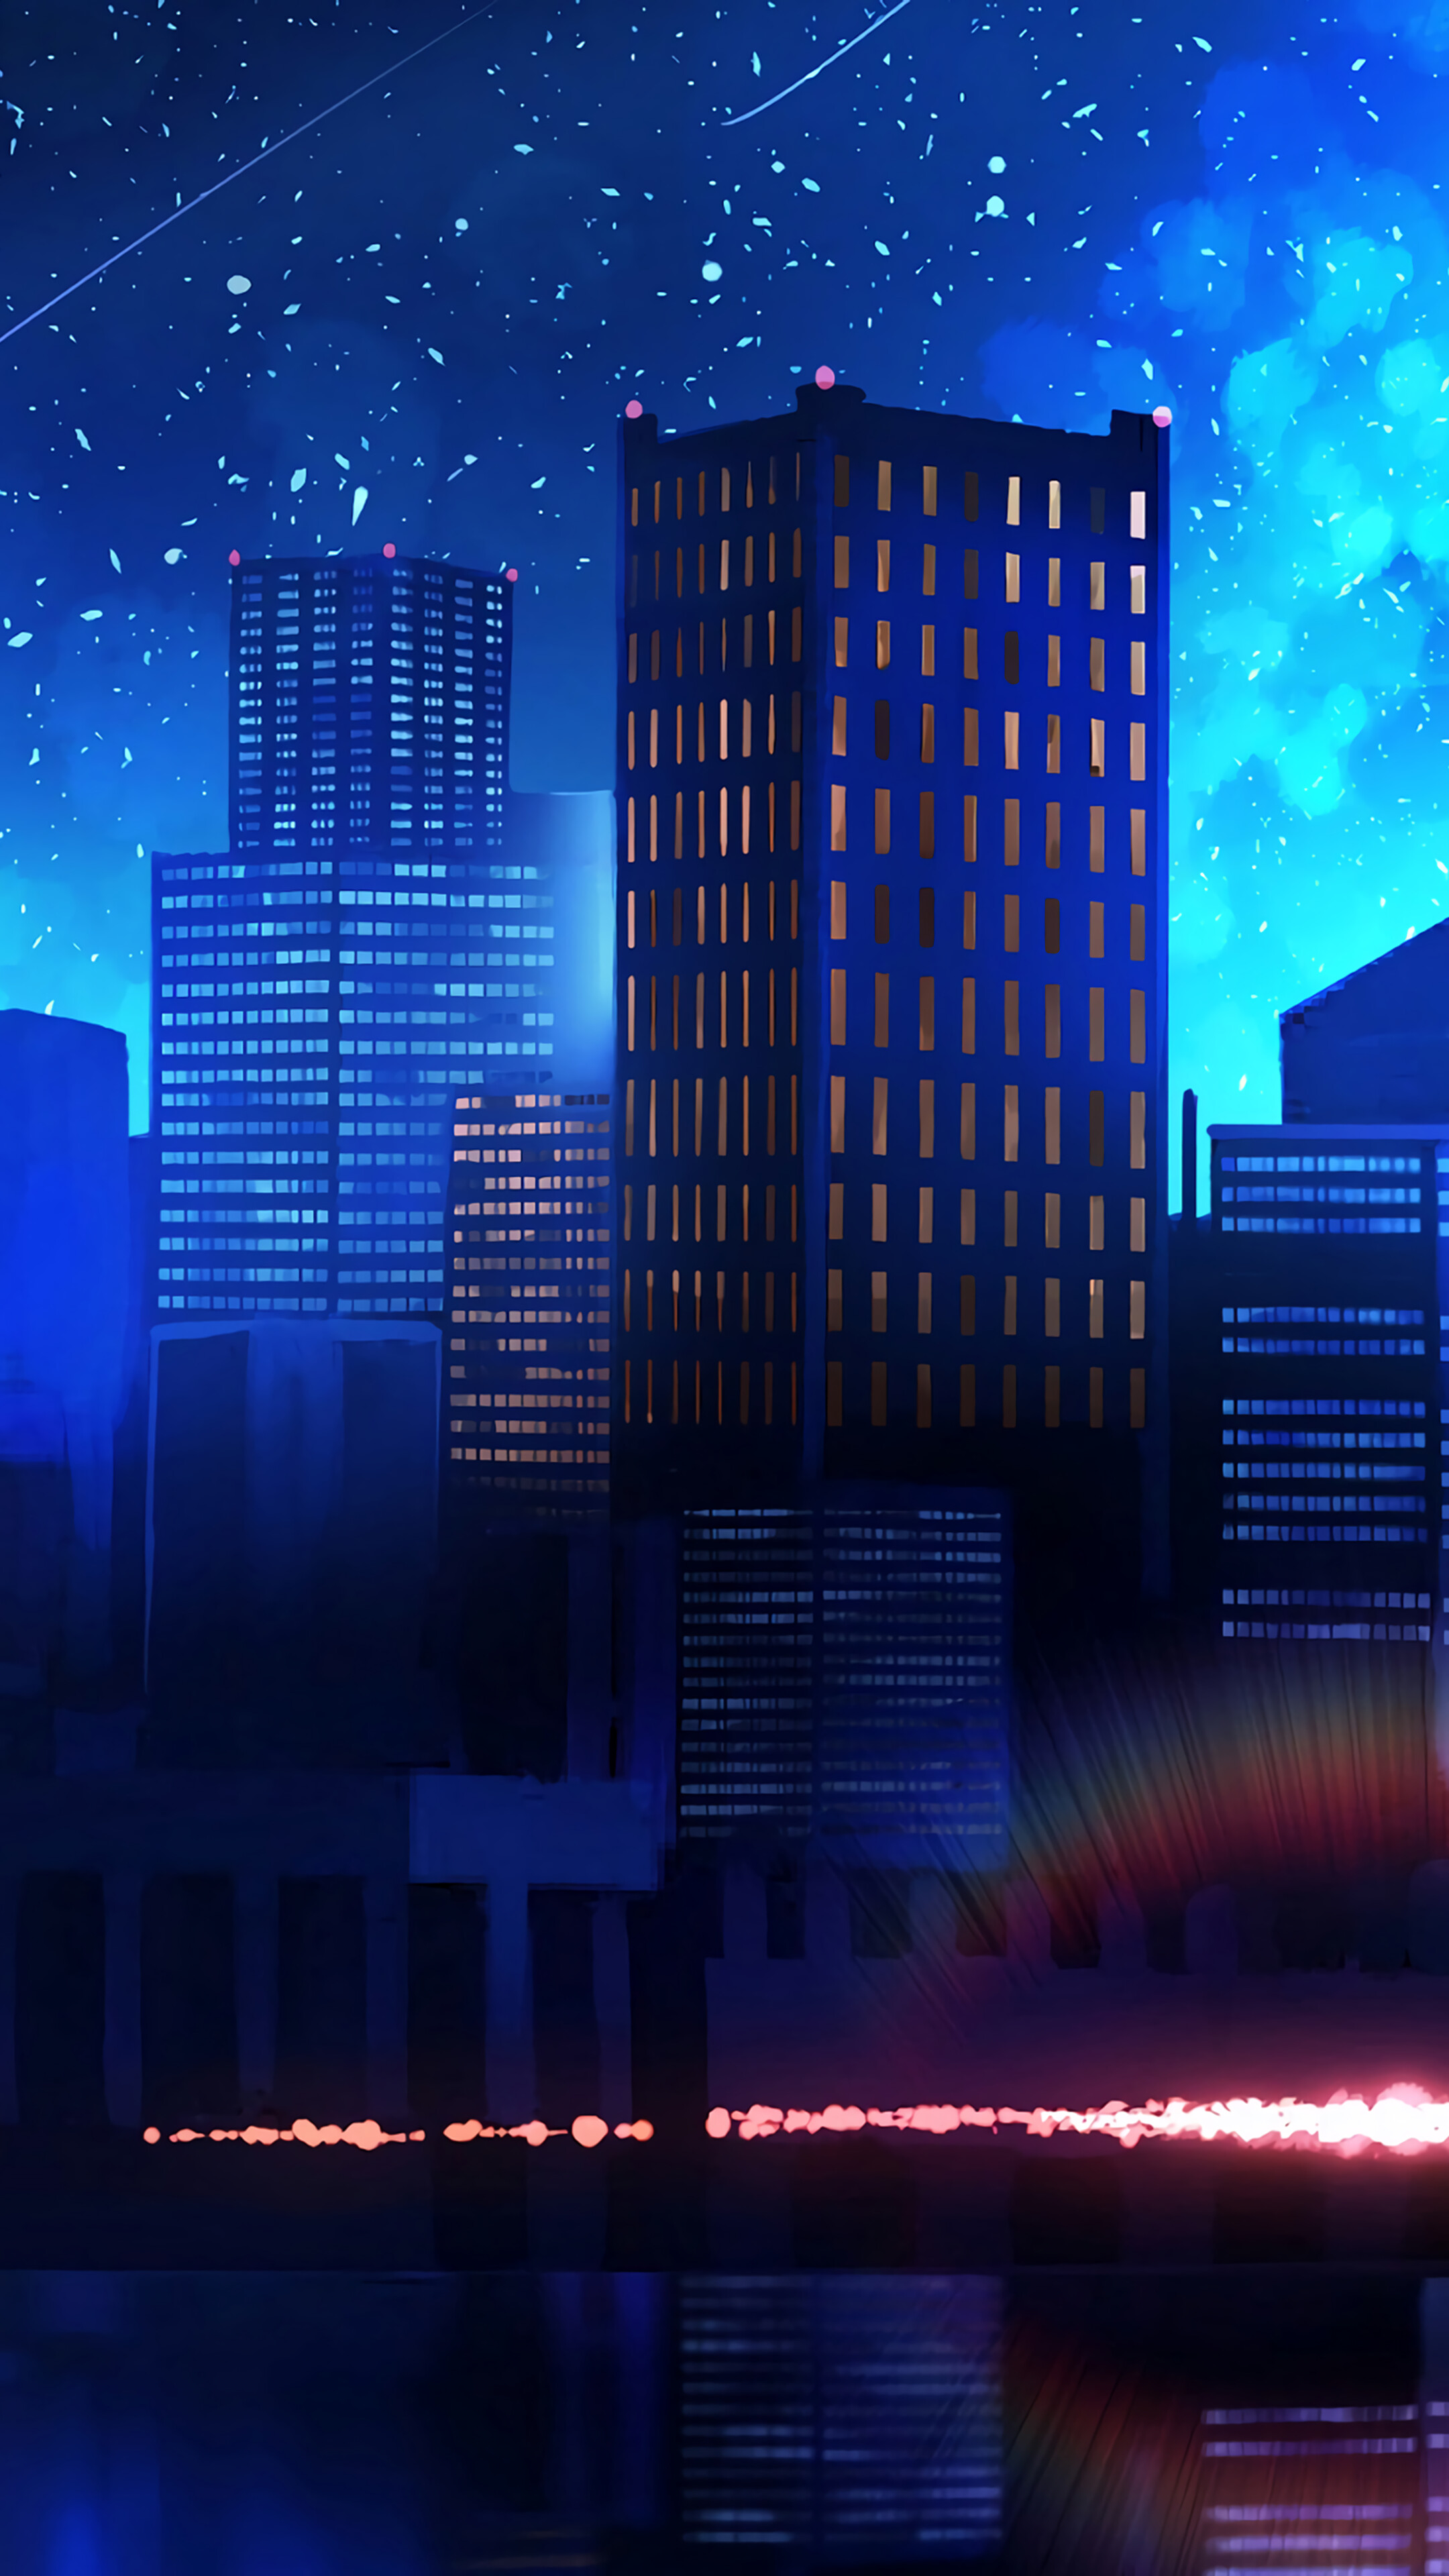 Night, City, Digital Art, Illustration, 4K phone HD Wallpaper, Image, Background, Photo and Picture. Mocah HD Wallpaper